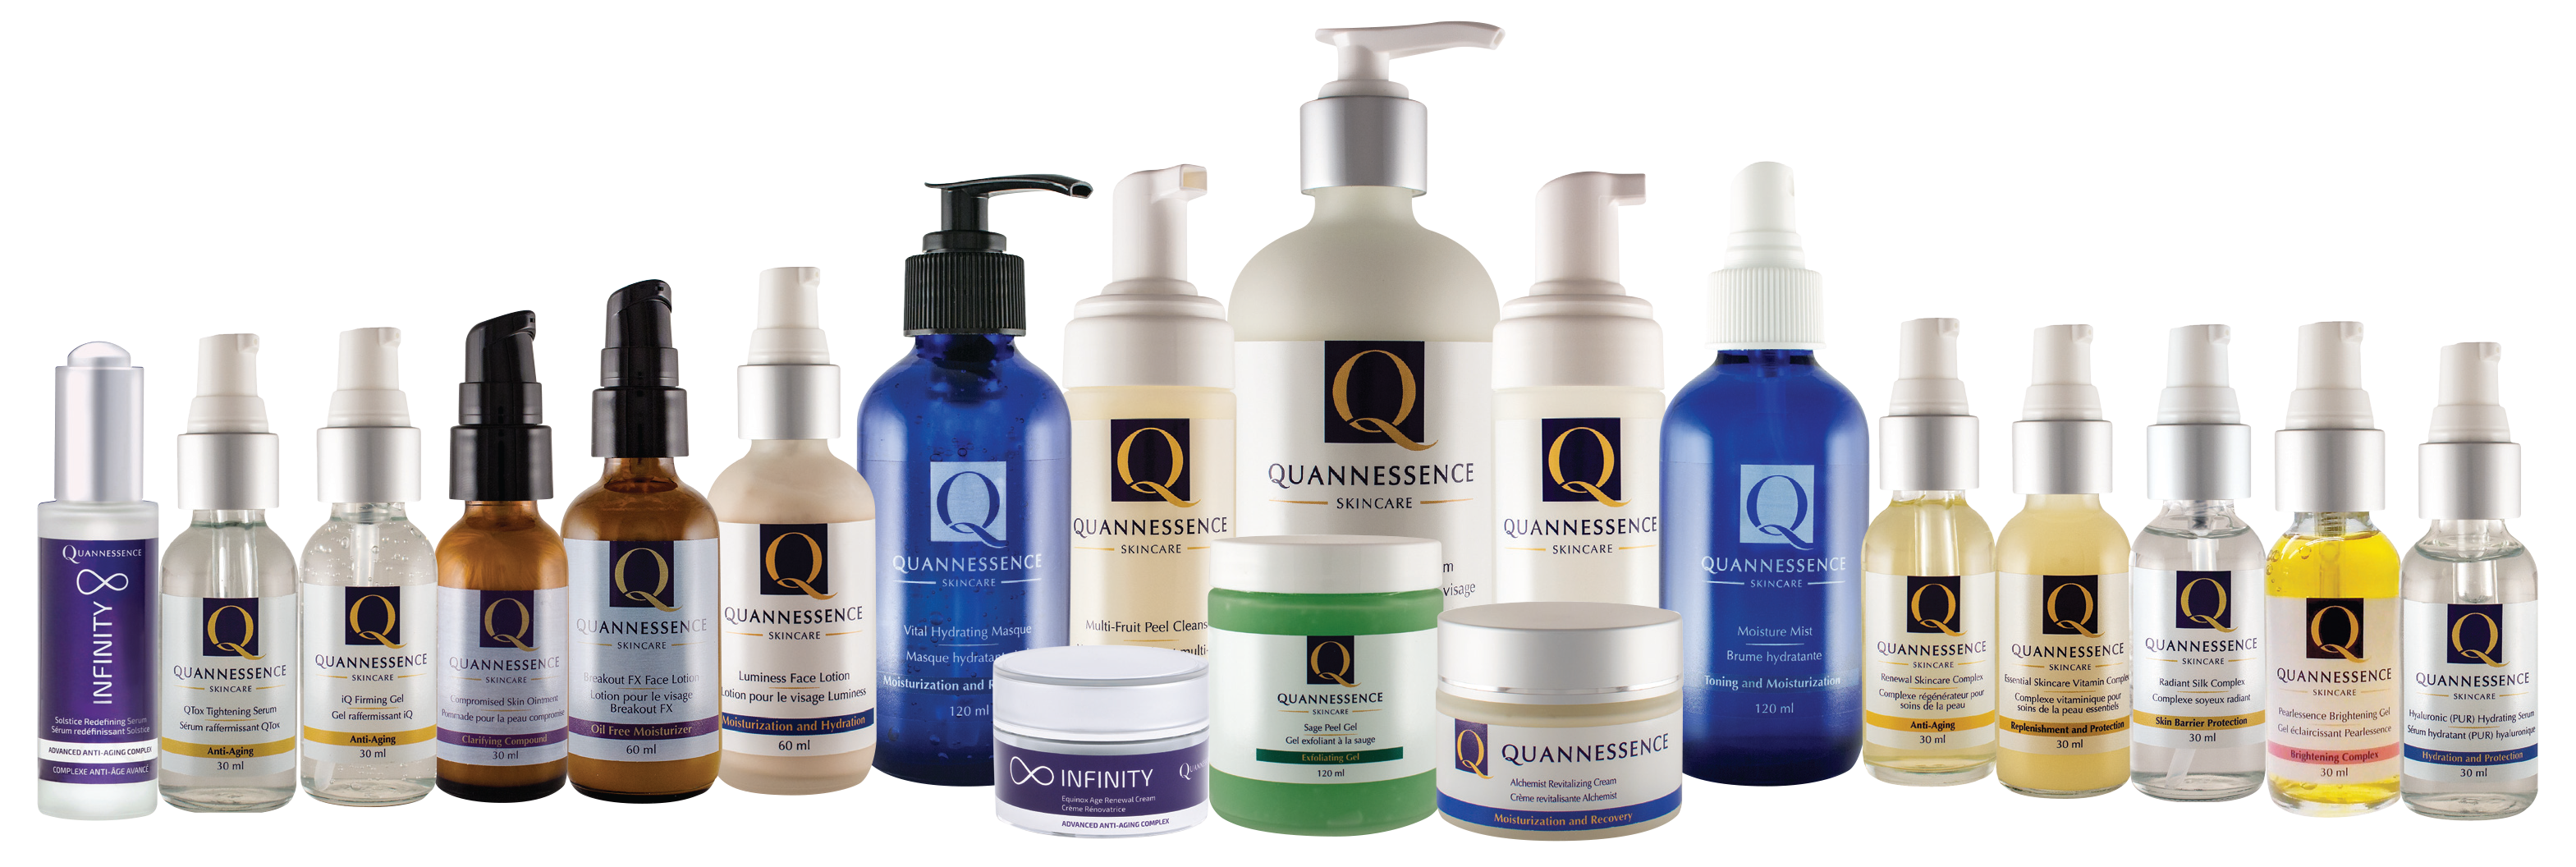 Quannessence Product Line